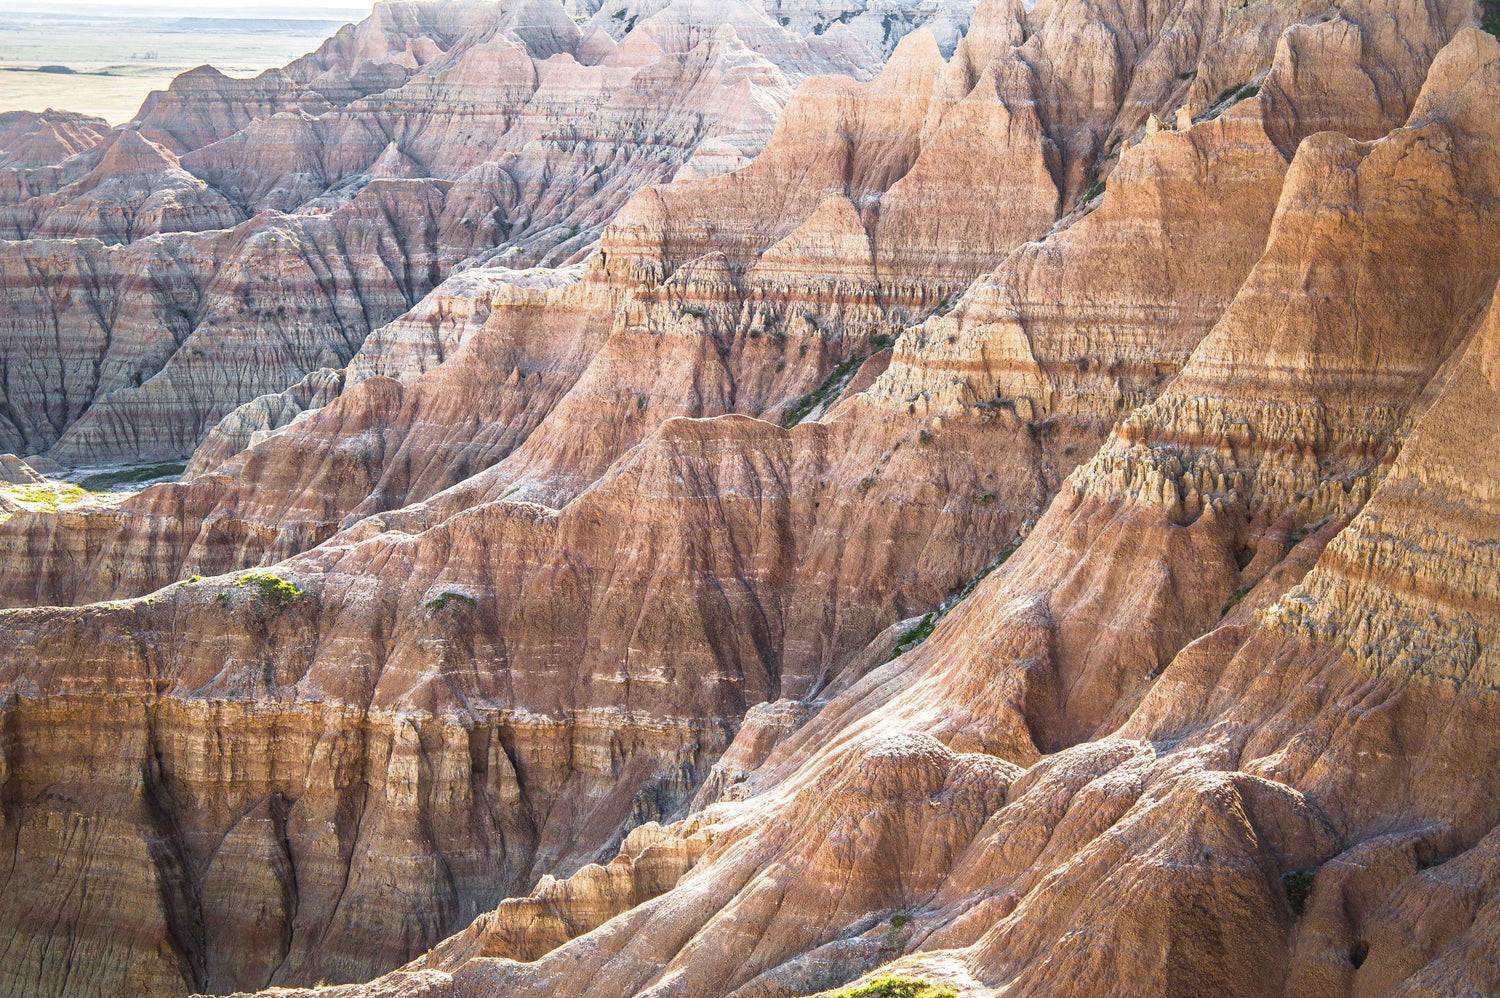 Fine photographic print of the painted ripples of the Badlands National Park landscape in South Dakota.